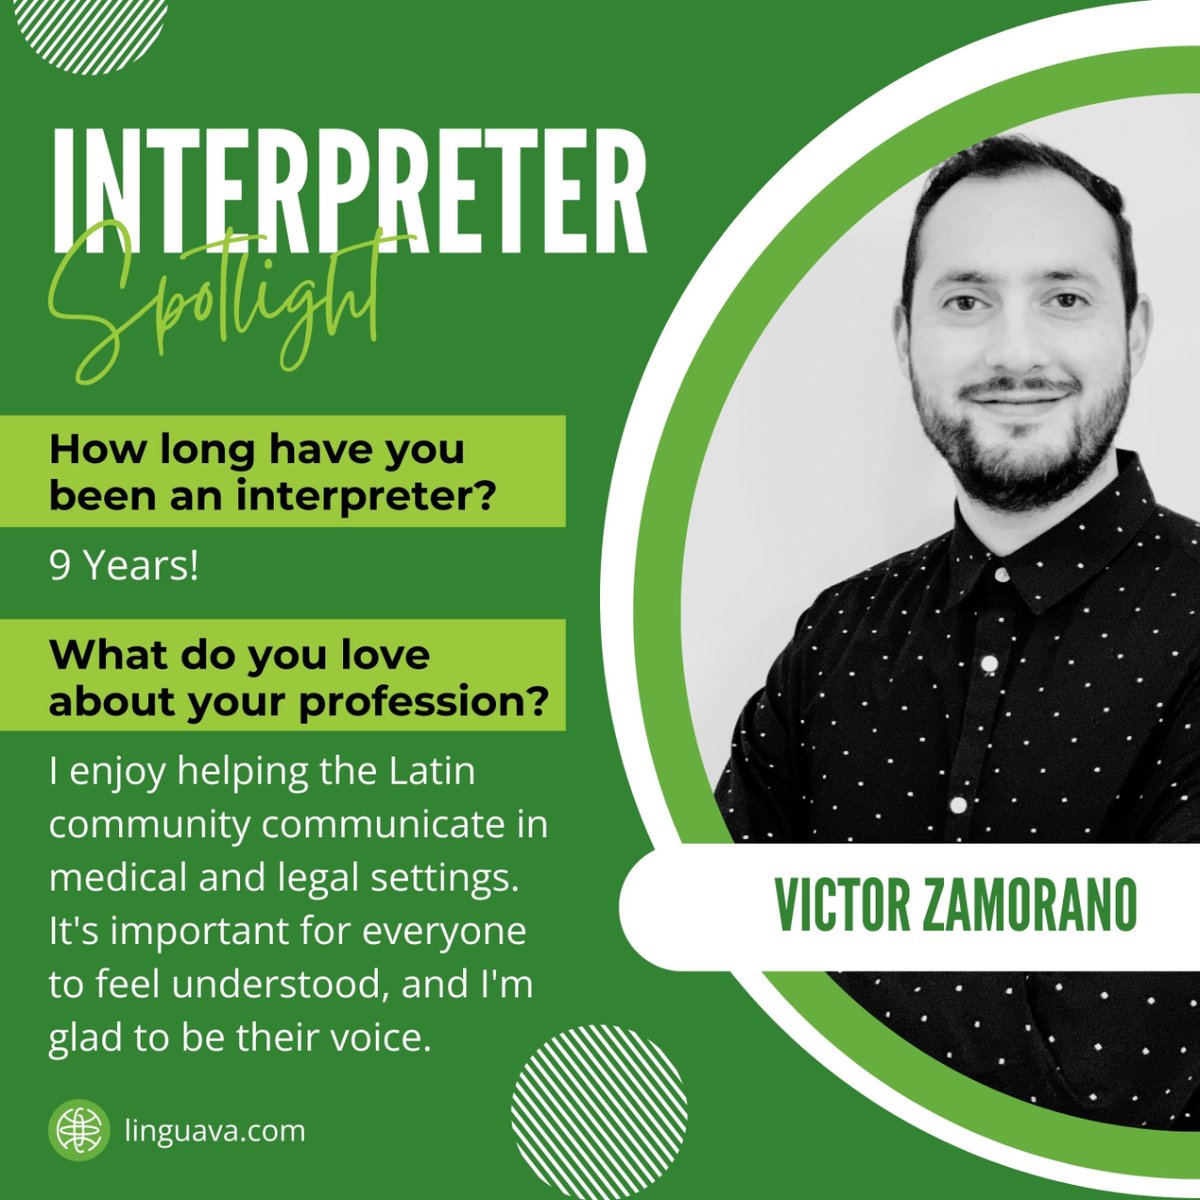 We're so grateful for Victor and all the interpreters making a difference in lives every day. #LanguageAccessibility #HealthcareHeroes